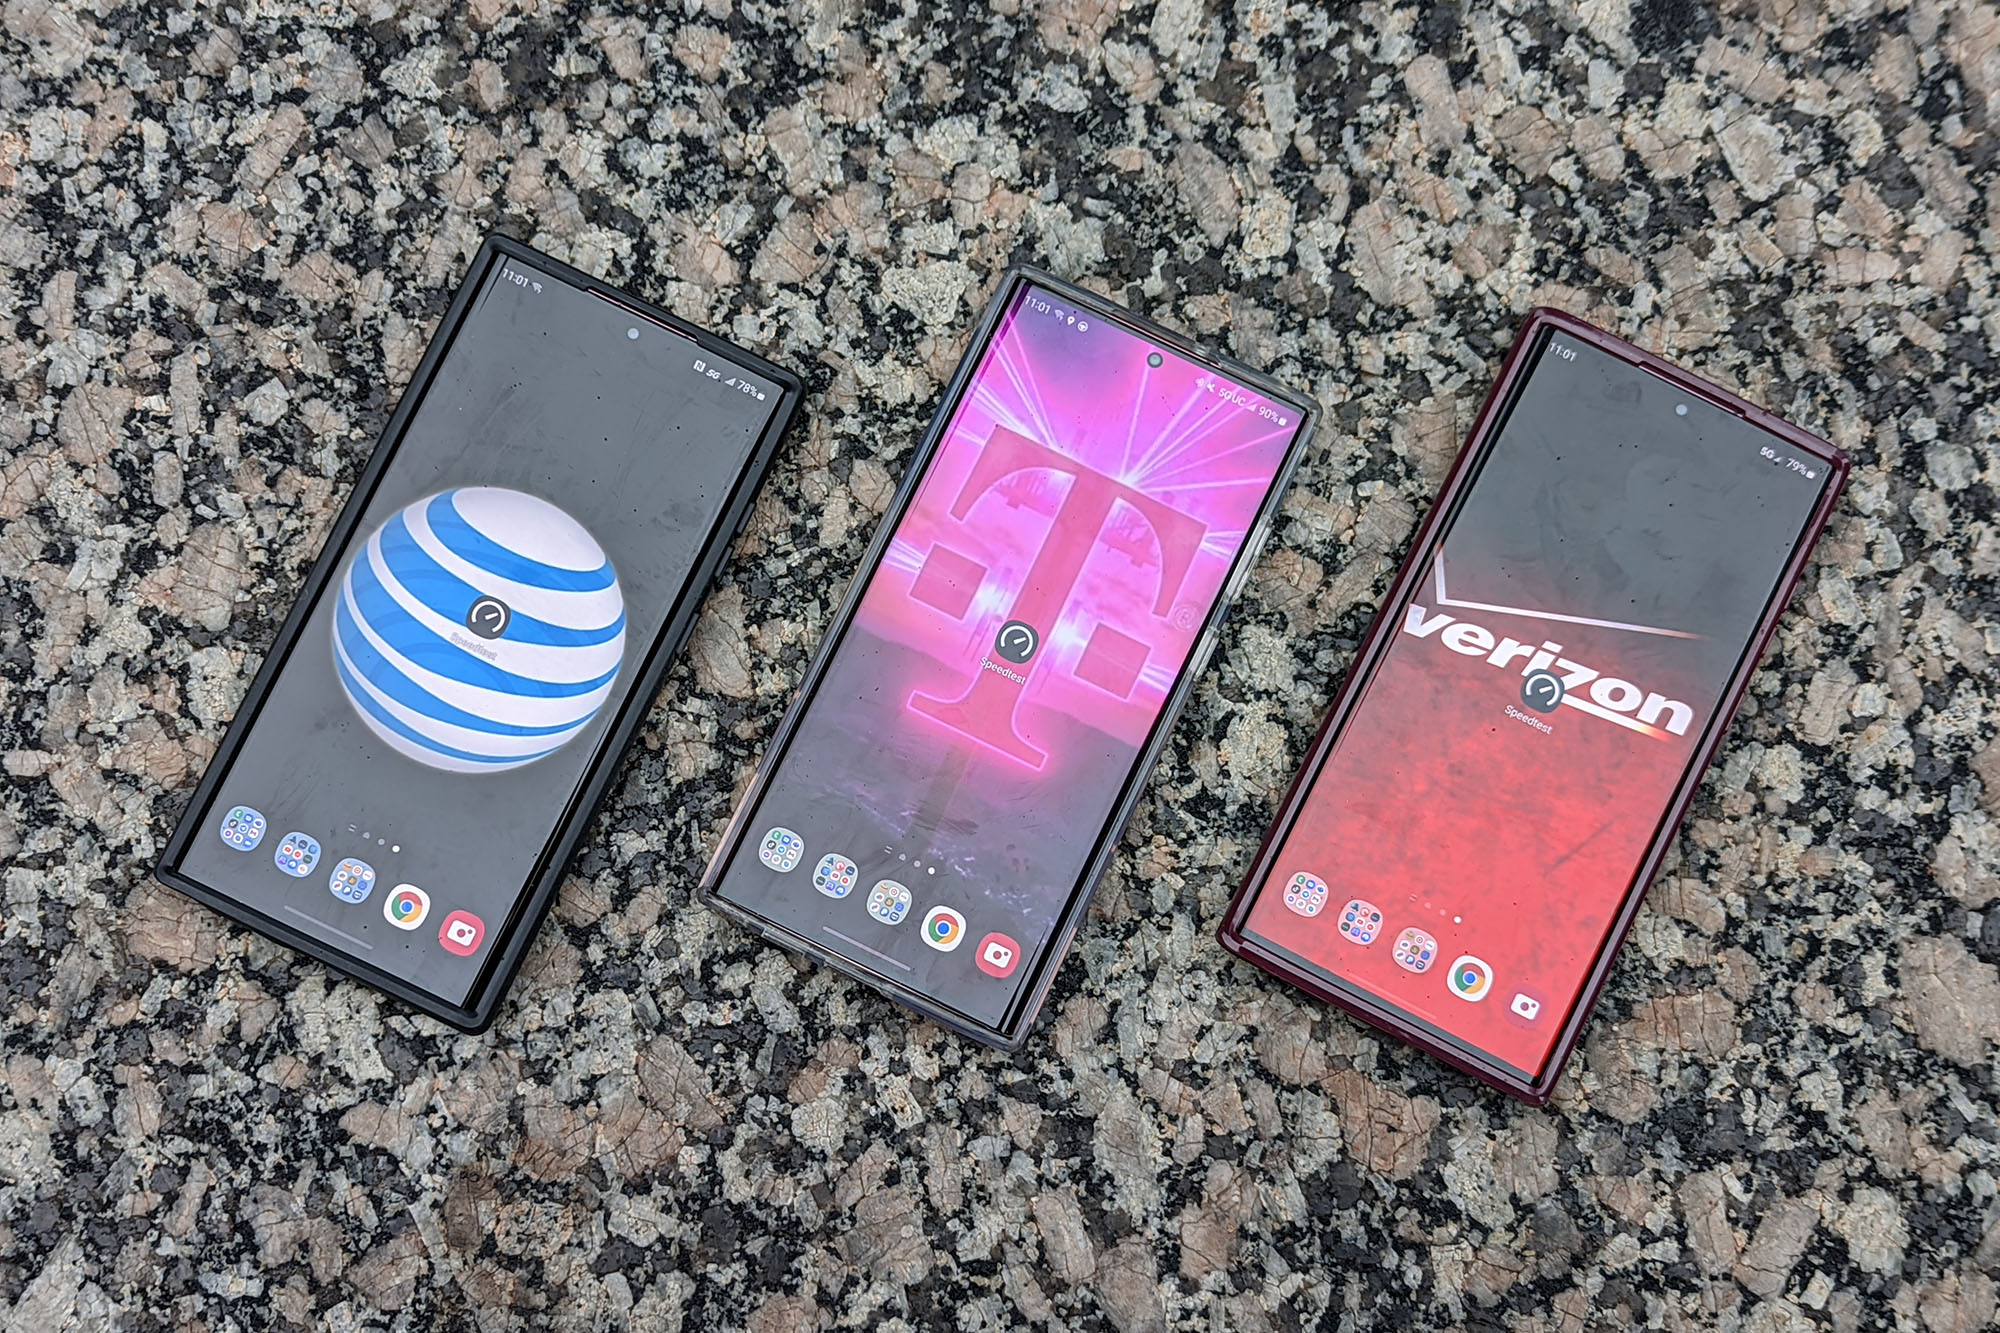 Phones from three carriers rest on a marble slab.